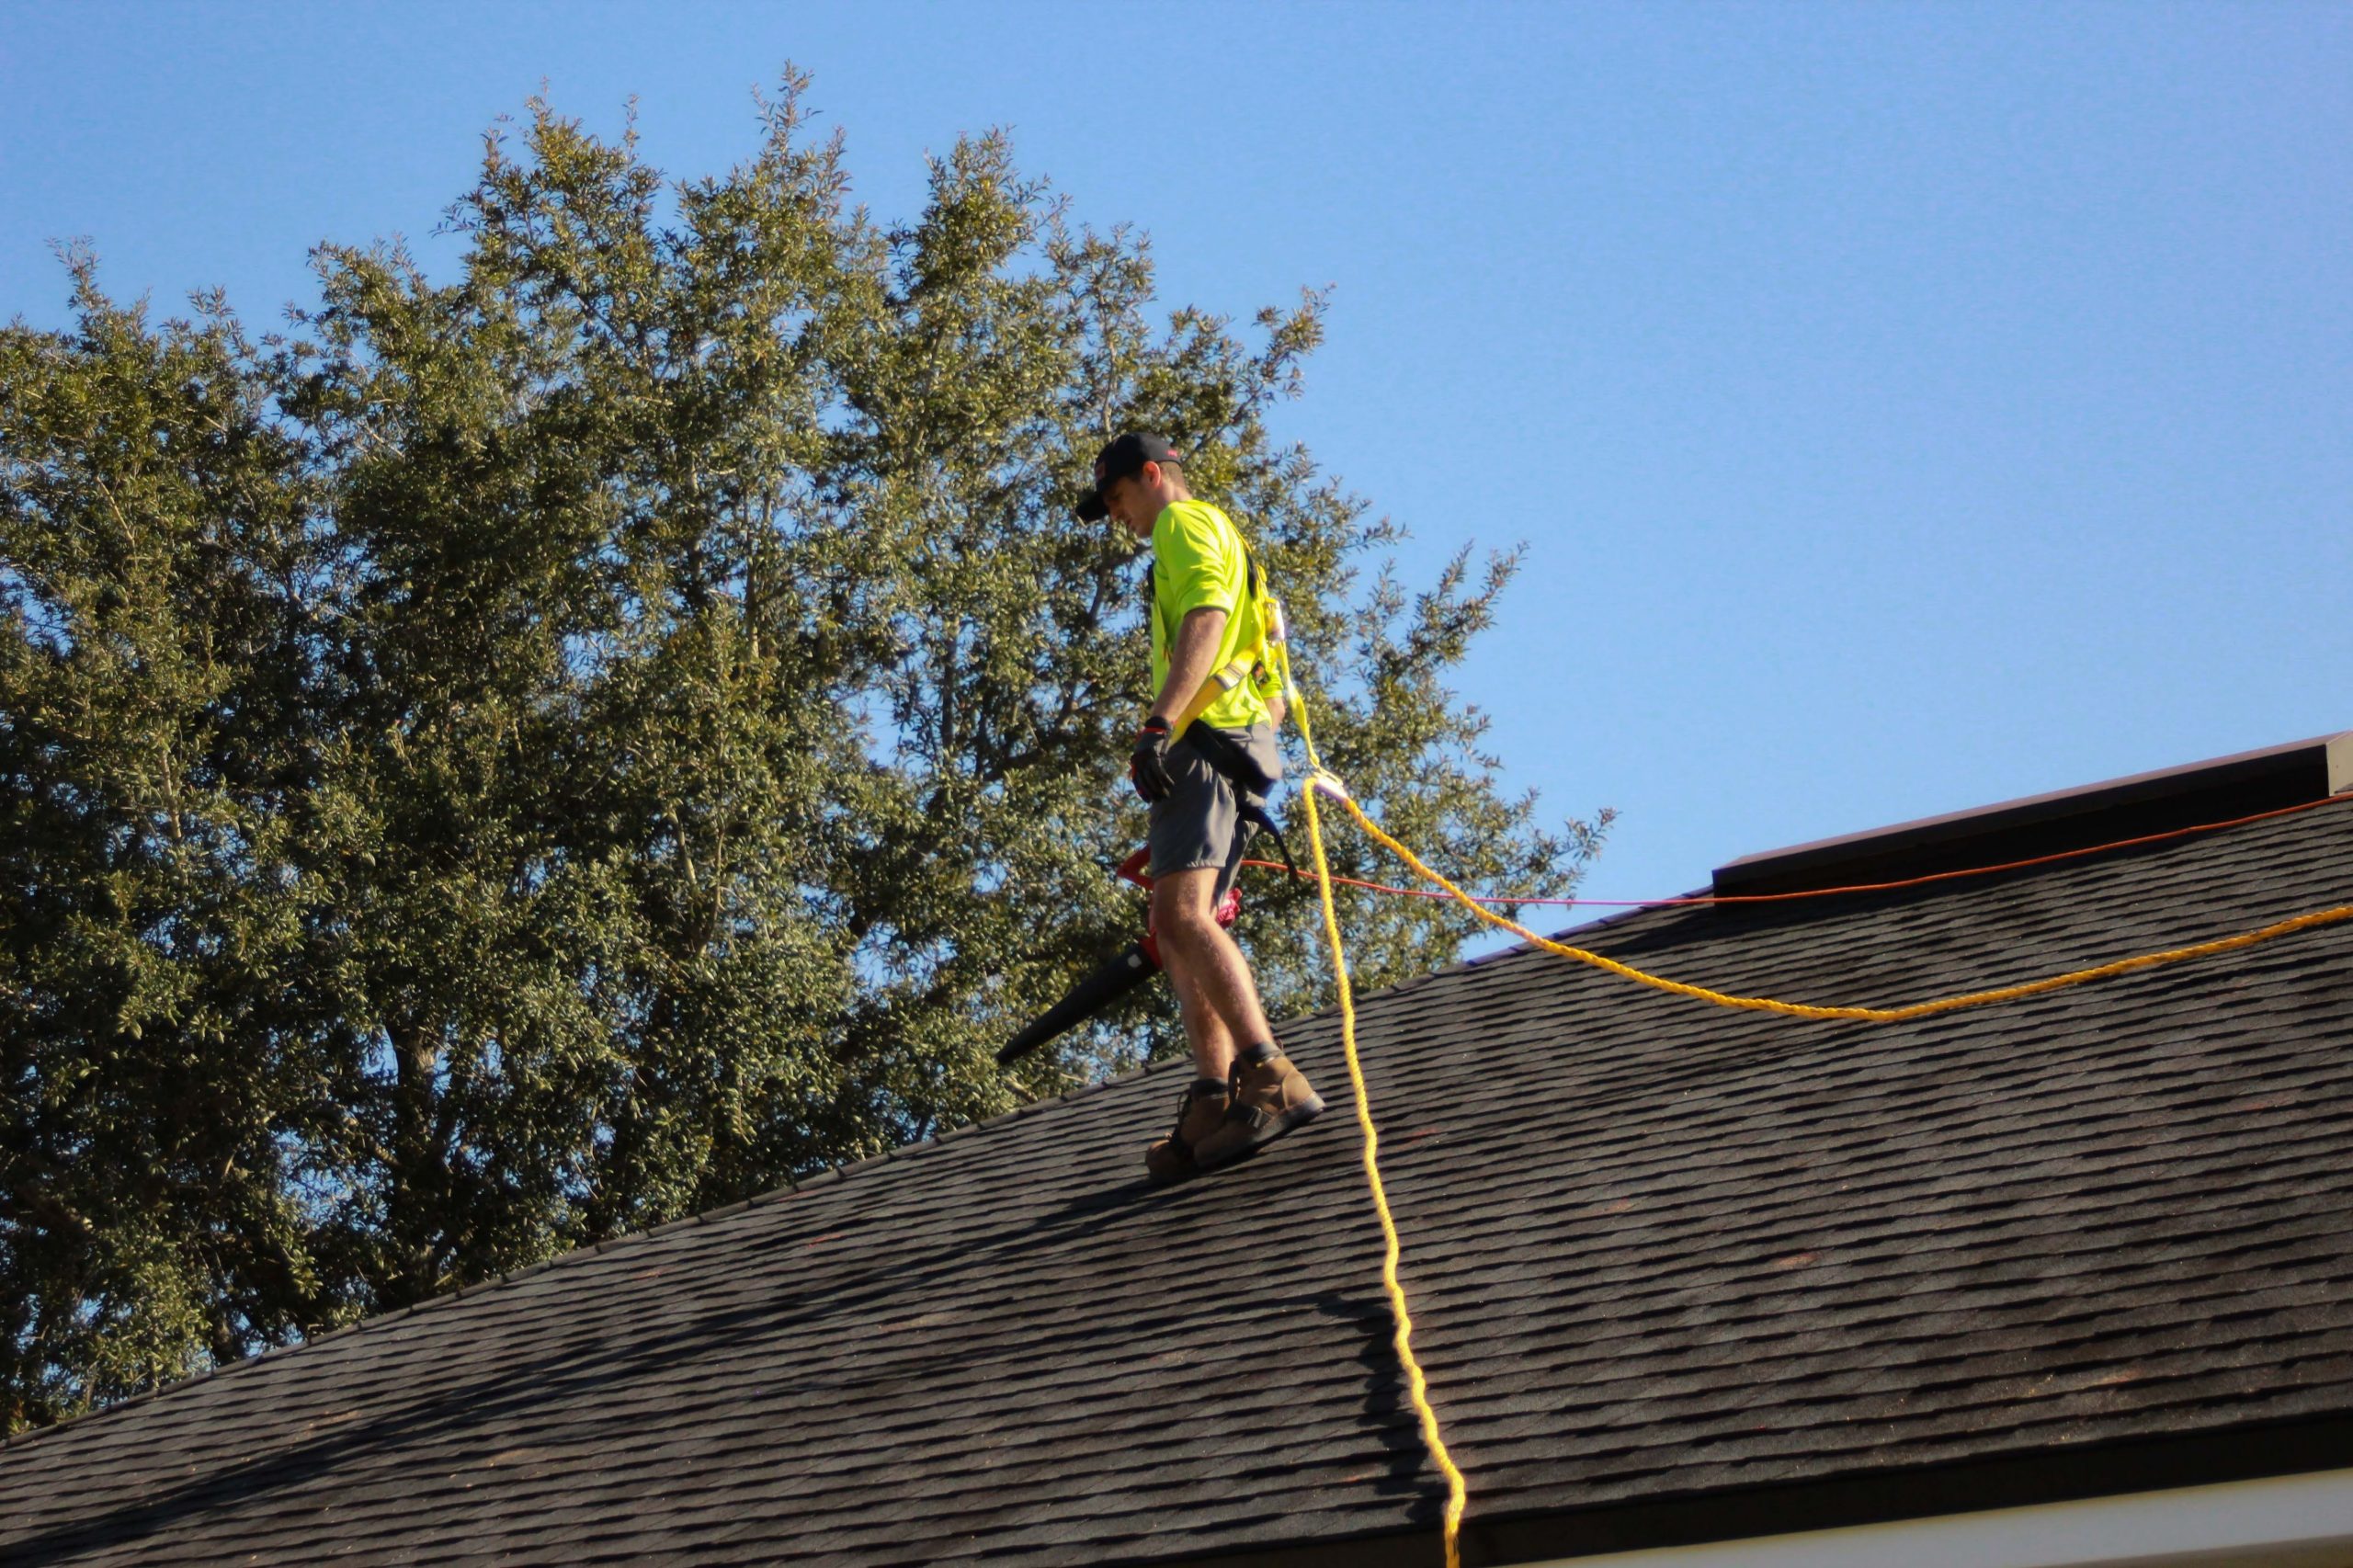 Roofer tied to the roof walking around.